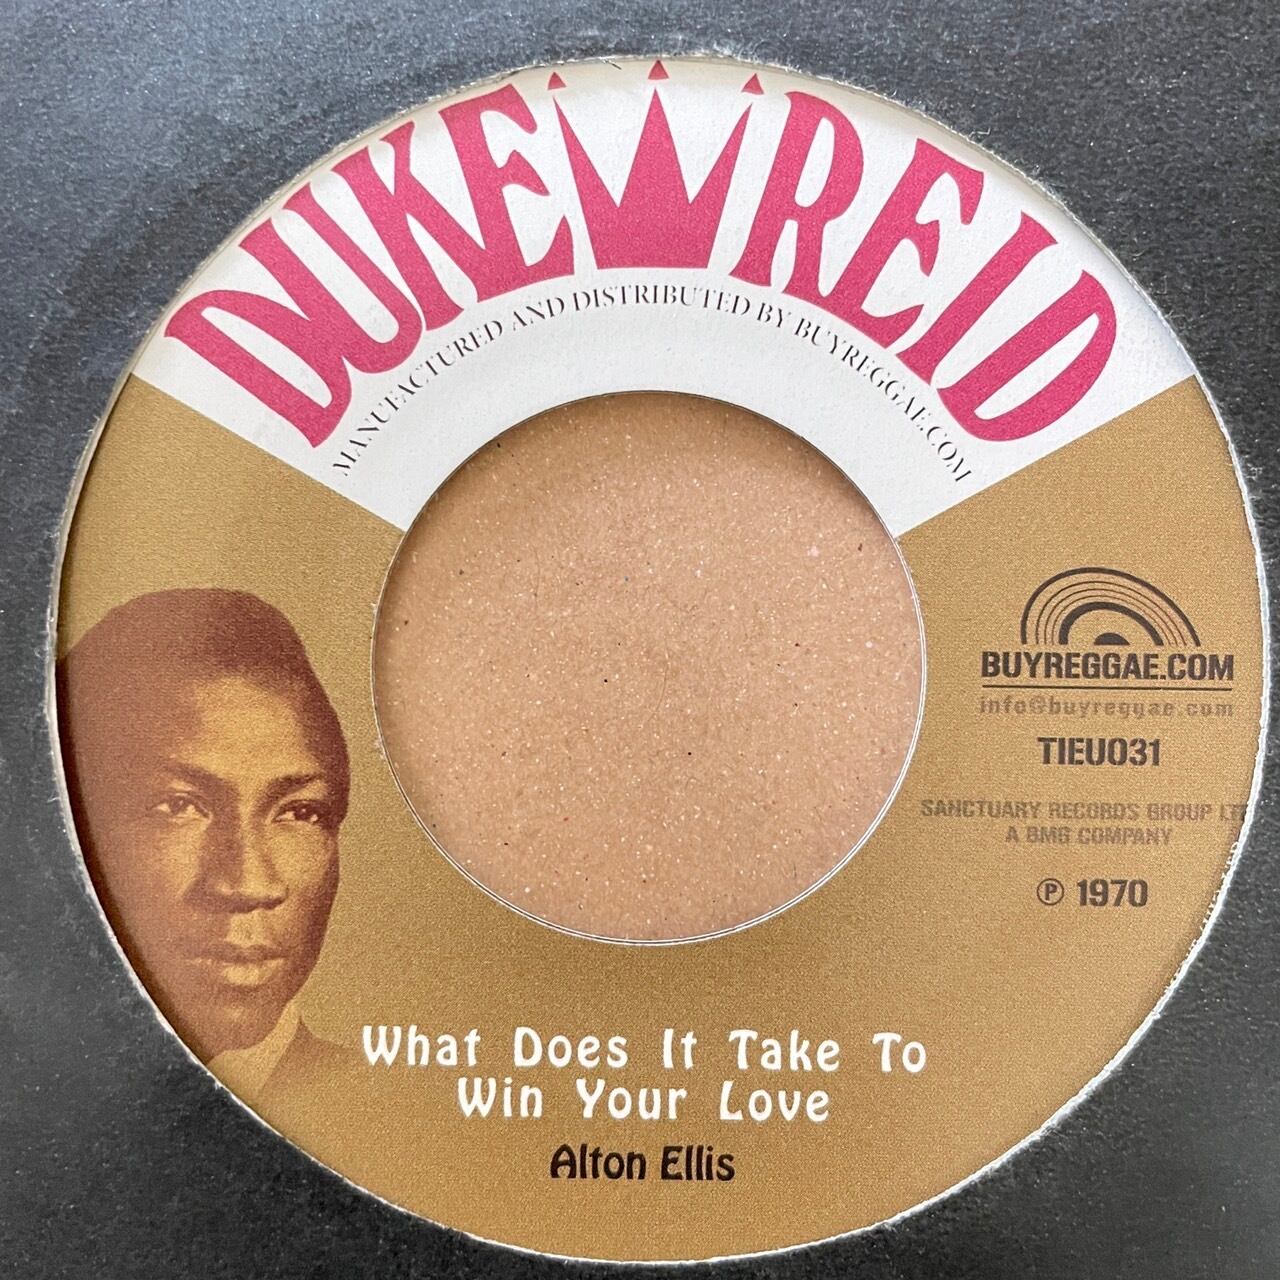 Alton Ellis - What Does It Take To Win Your Love【7-21090】